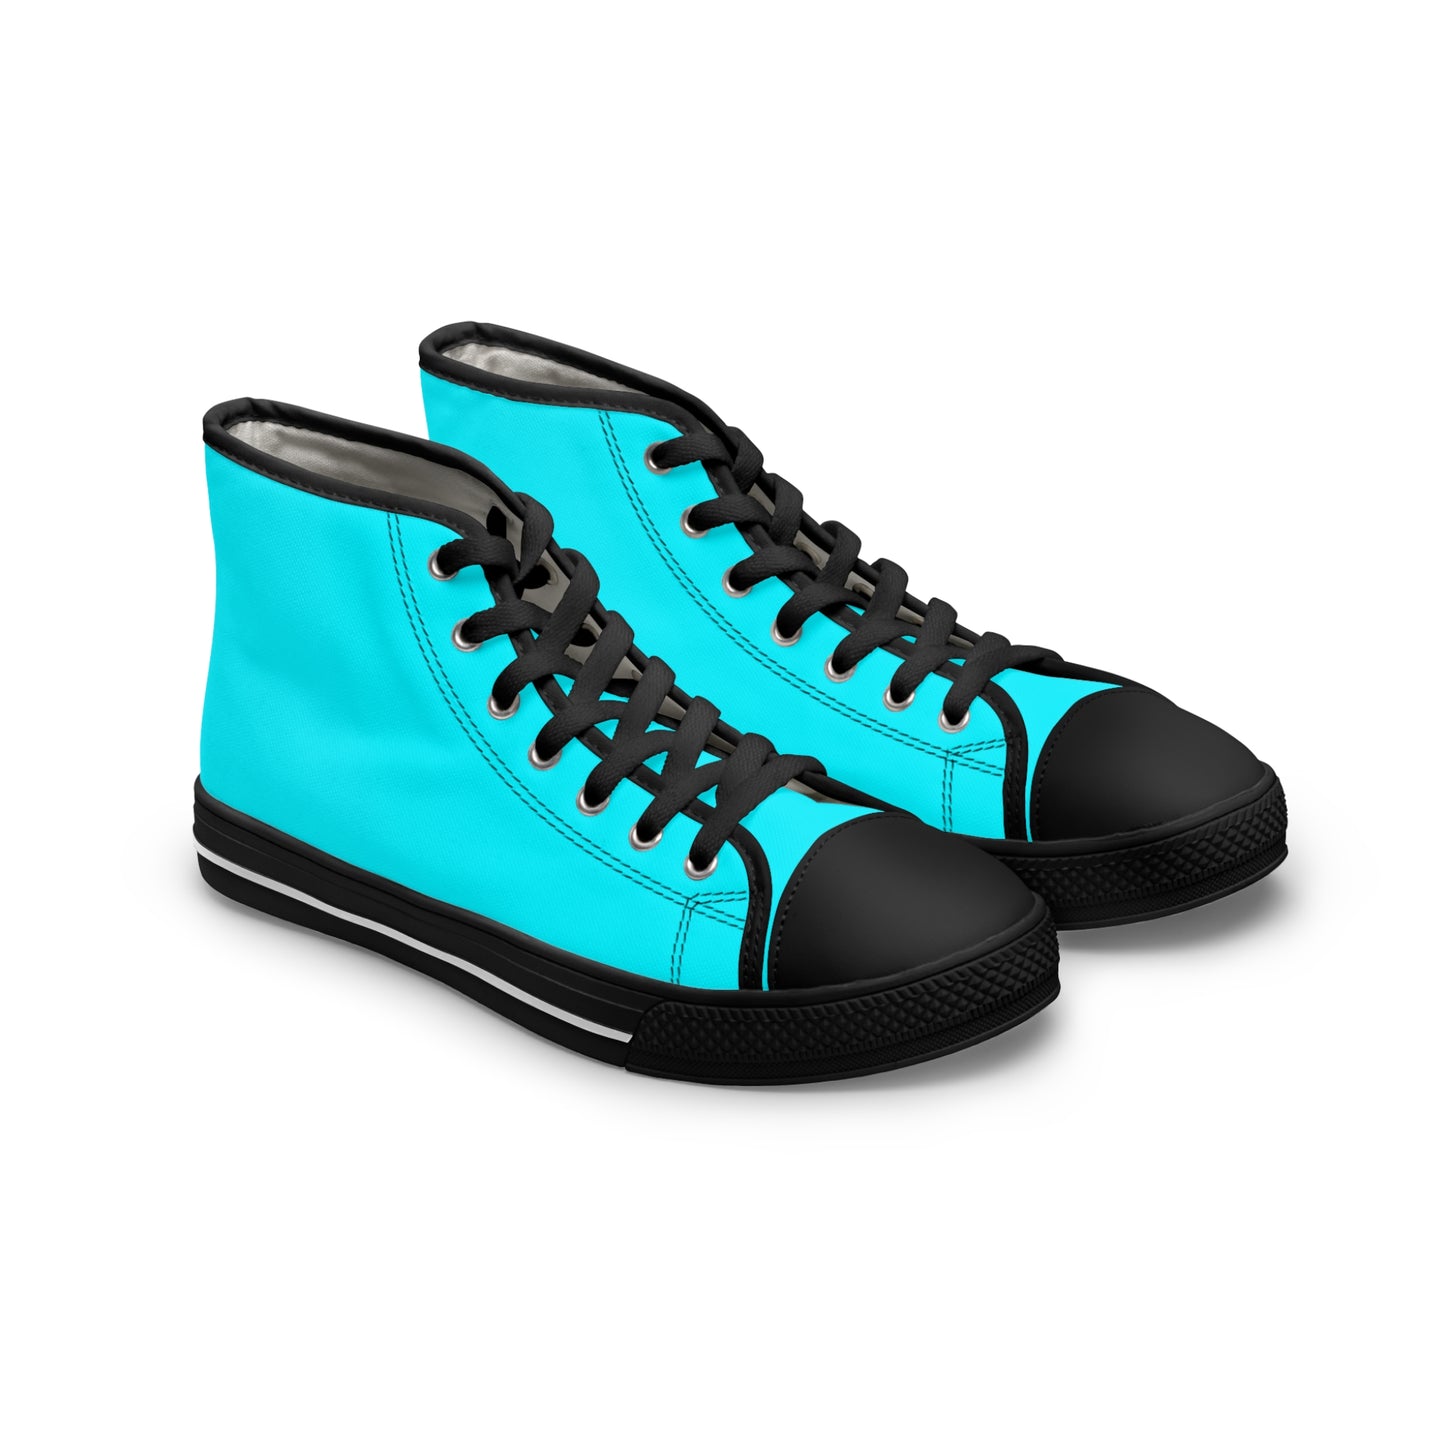 Women's Canvas High Top Solid Color Sneakers - Cool Pool Aqua Blue US 12 White sole